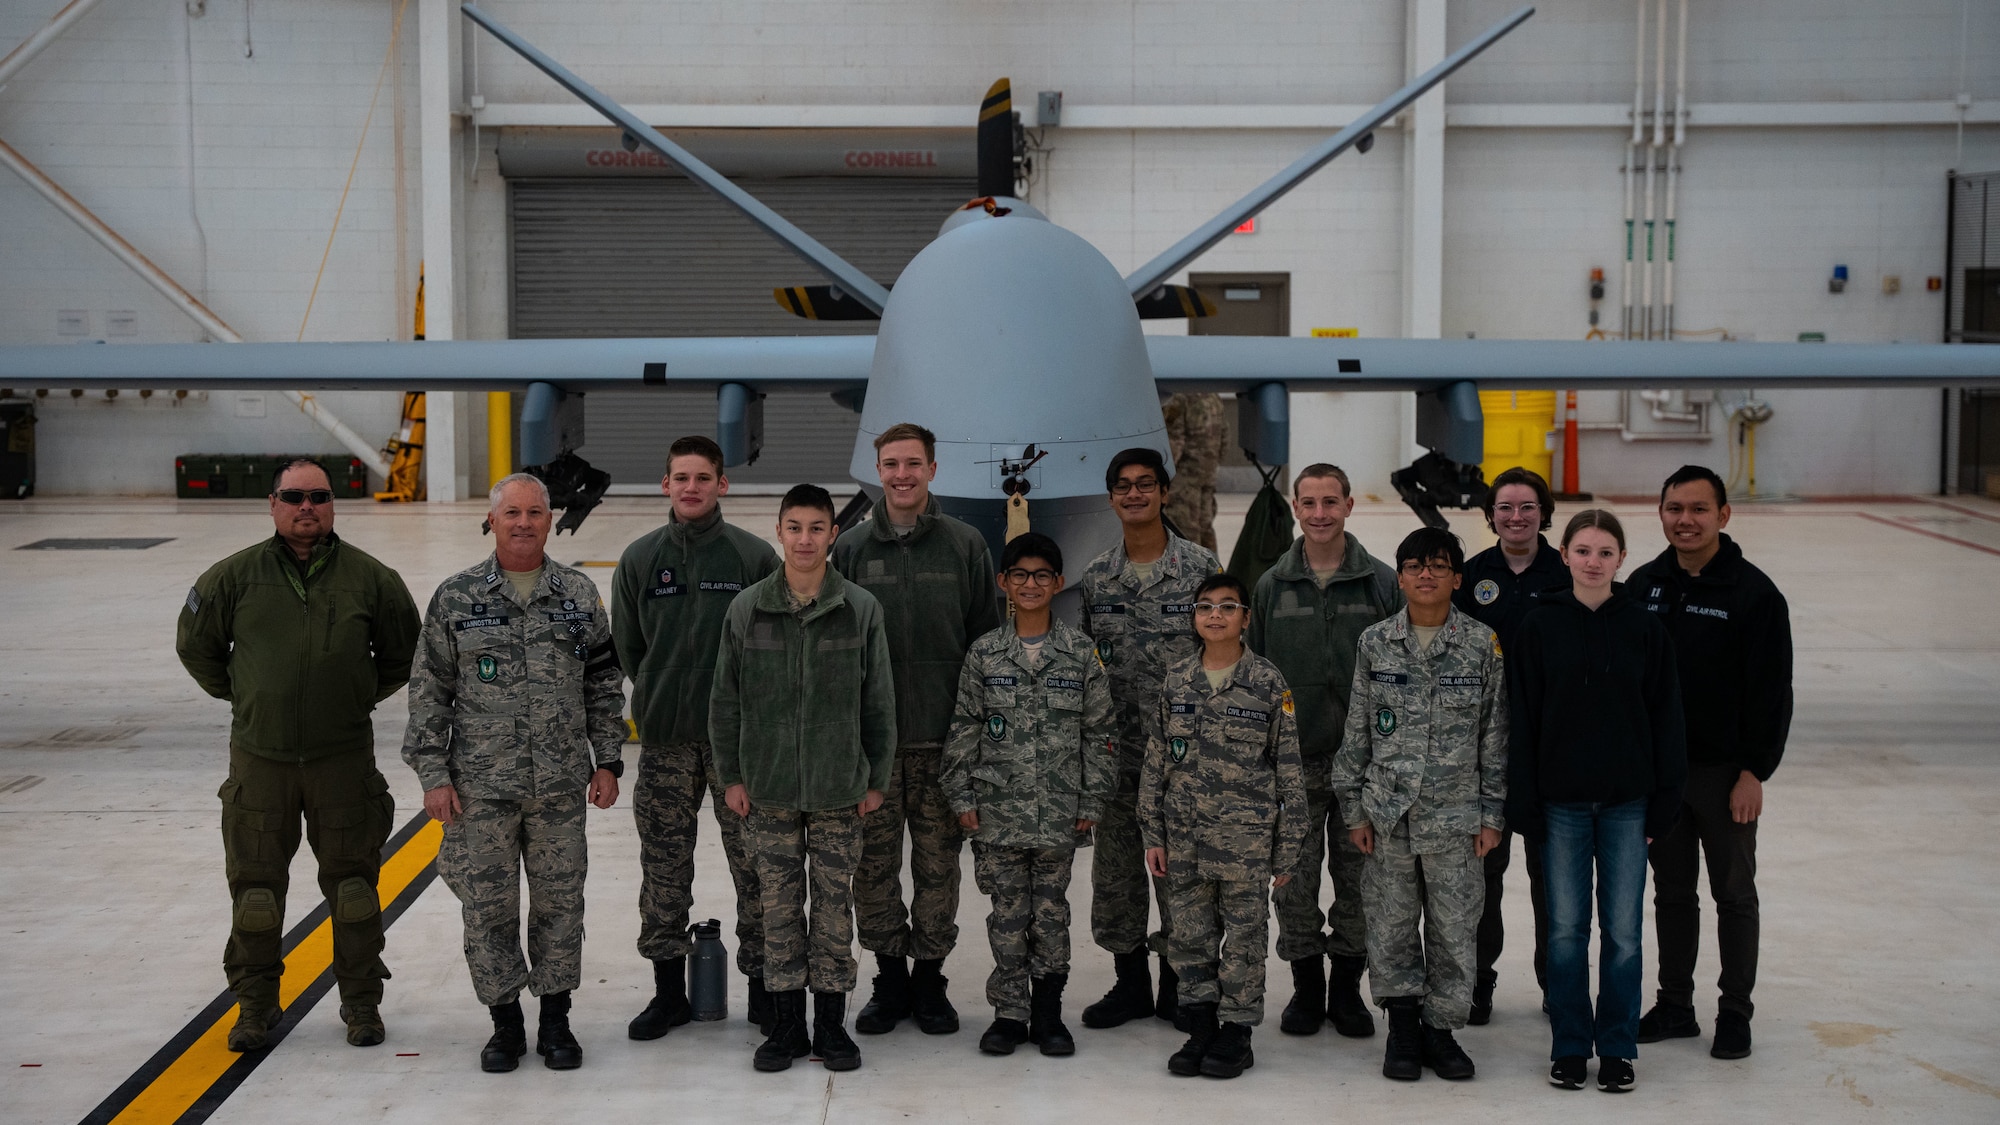 A group of adults and young adults in a mix of military uniform and casual civilian attire stand in front of a military aircraft for a group photo inside an aircraft hangar.